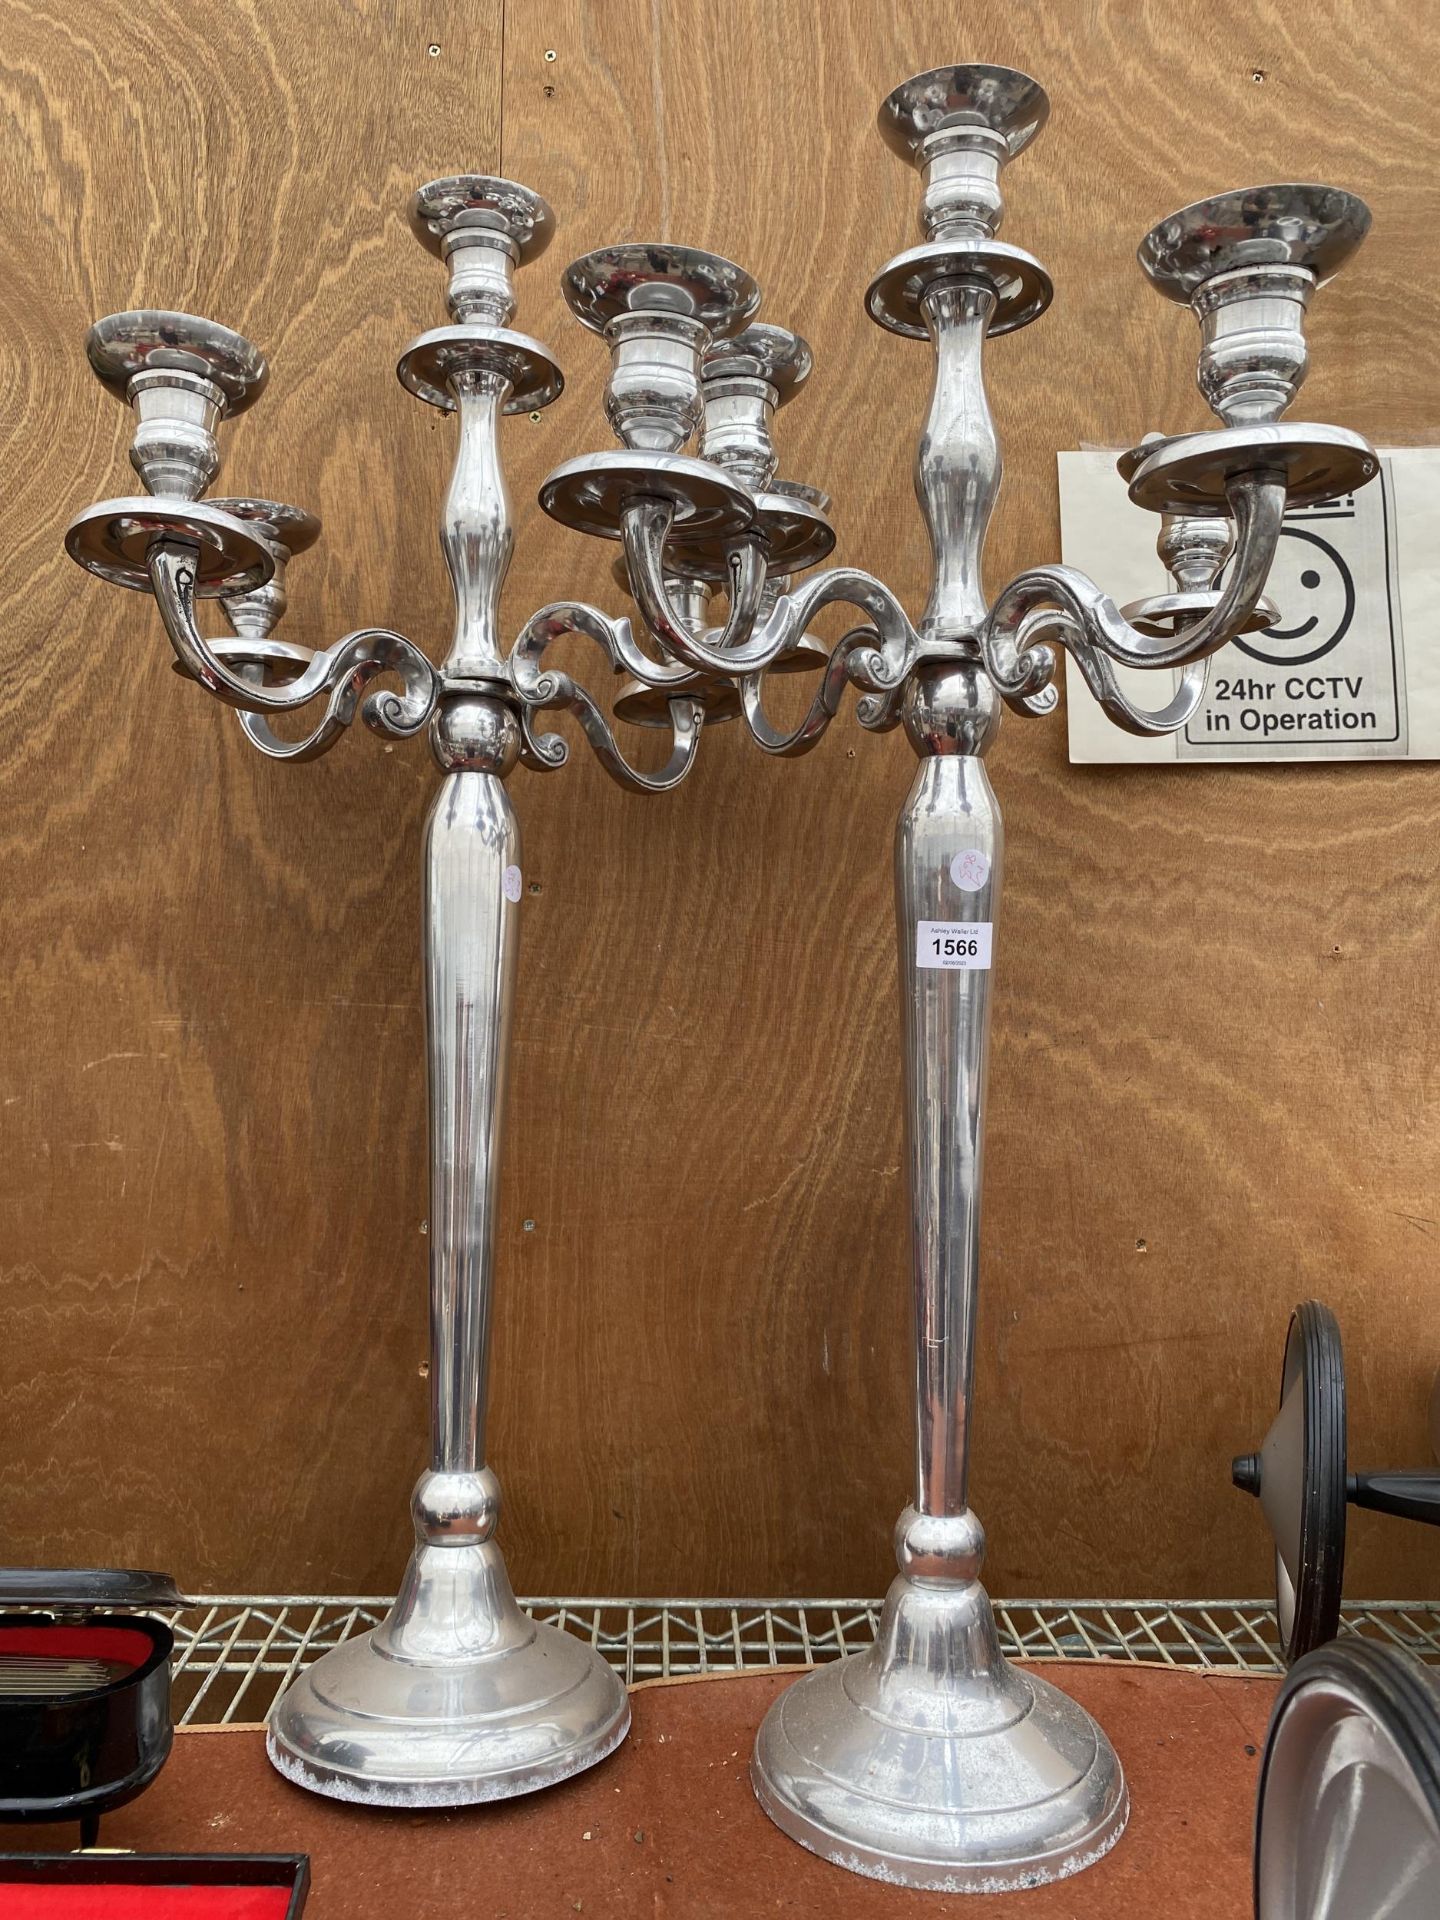 A PAIR OF FOUR BRANCH METAL CANDLESTICKS